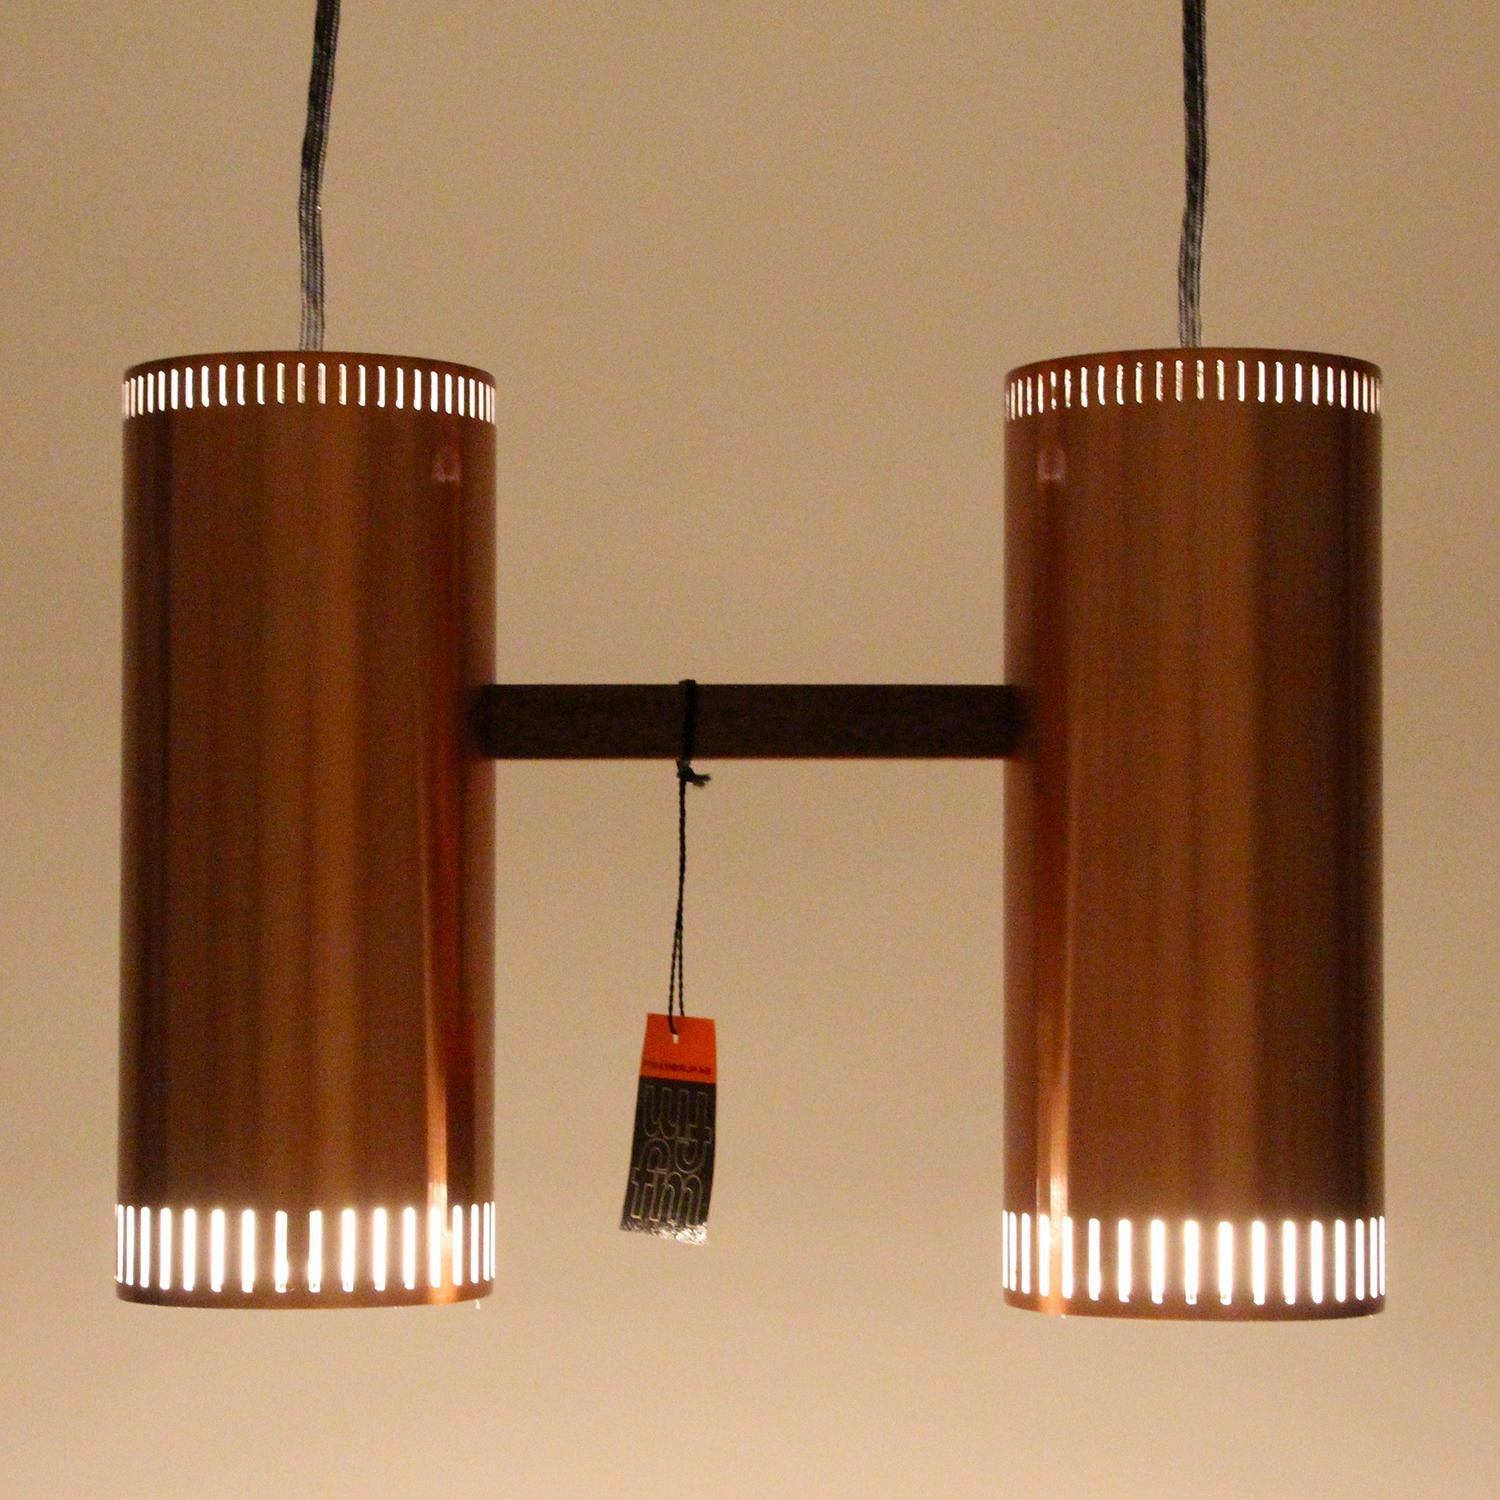 Cylinder II, copper pendant light by Jo Hammerborg in 1966 for Fog & Mørup - Scandinavian modern copper light fixture with two individual pendants in extremely rare mint unused condition!

The Cylinder II is comprised of two identical cylinder